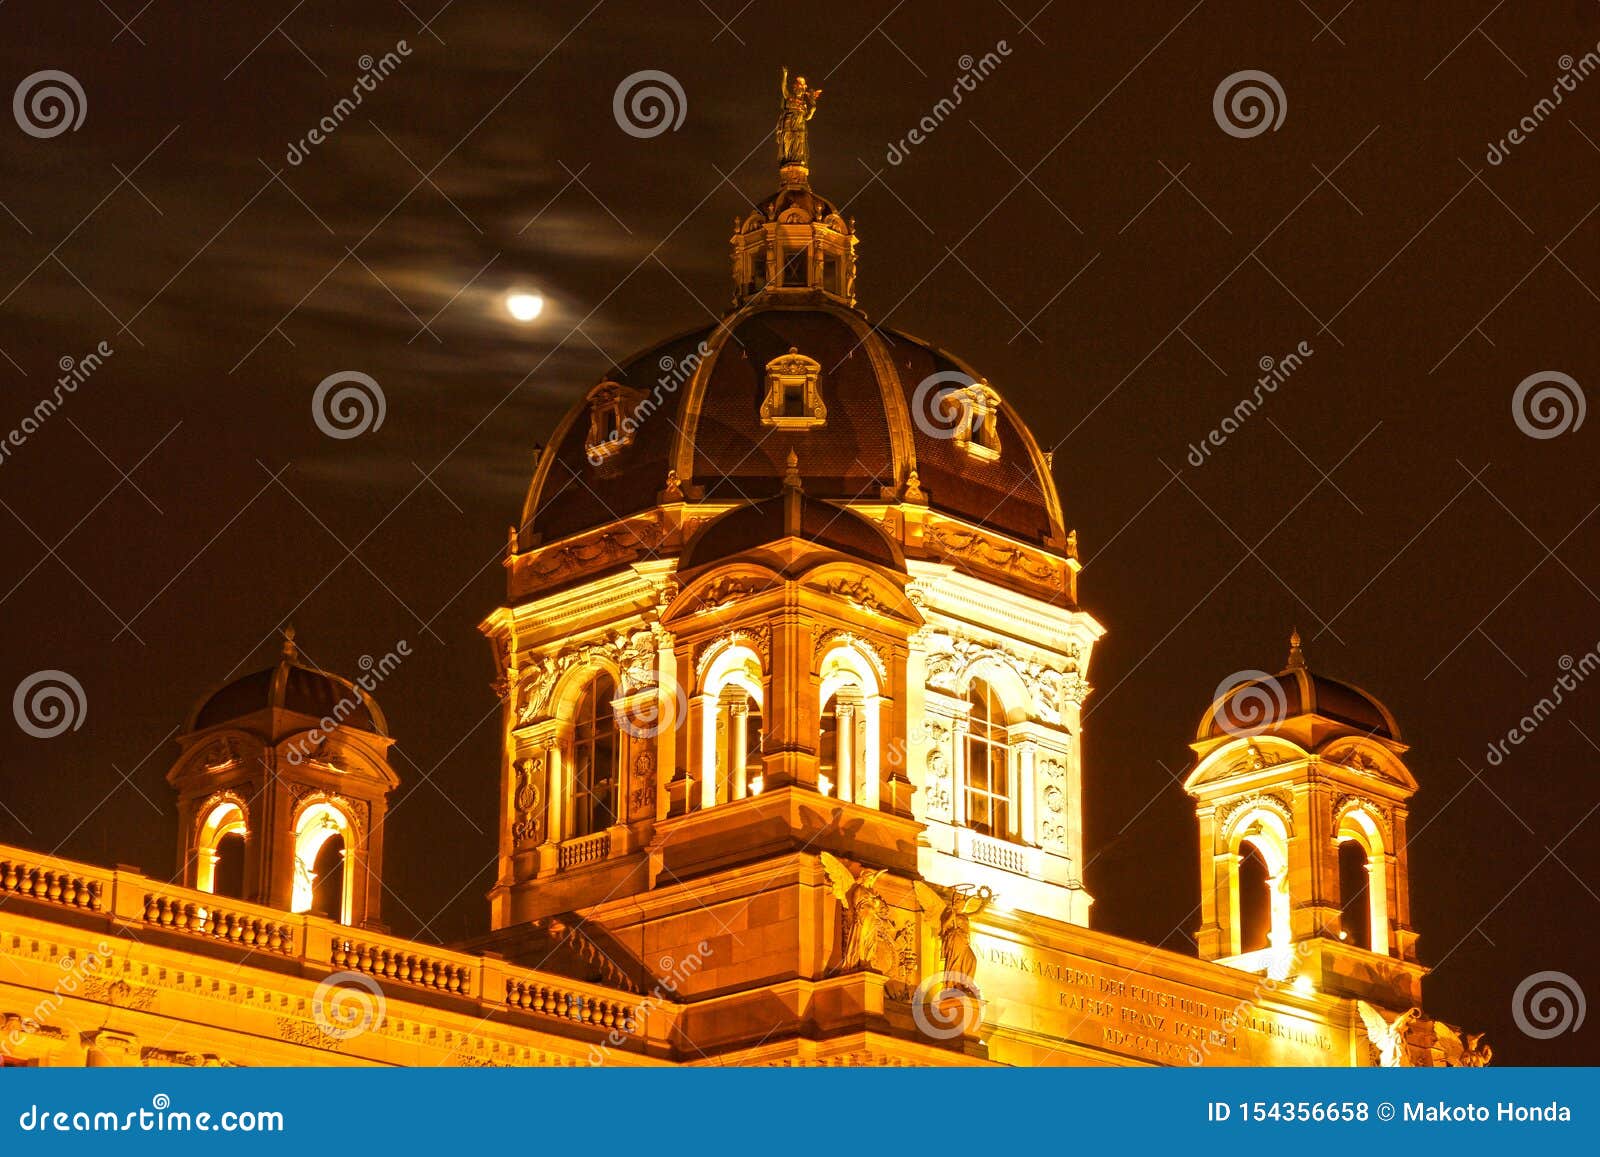 Vienna Art History Museum and the Moon Austria Stock Photo Image of